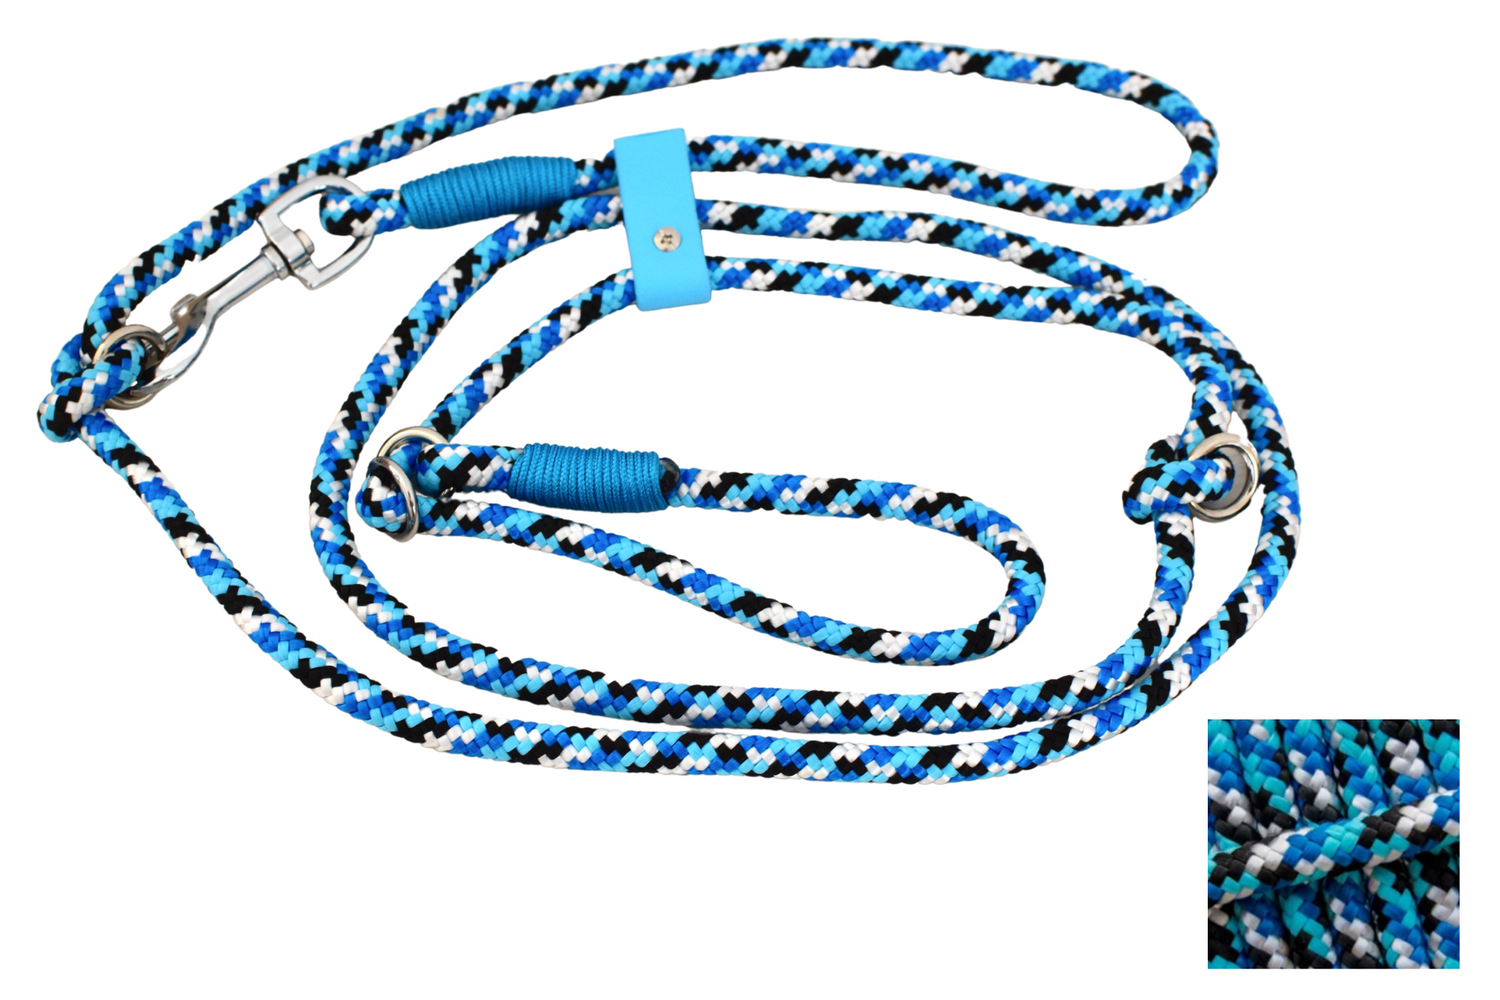 Loop Leashes with carabiner handle